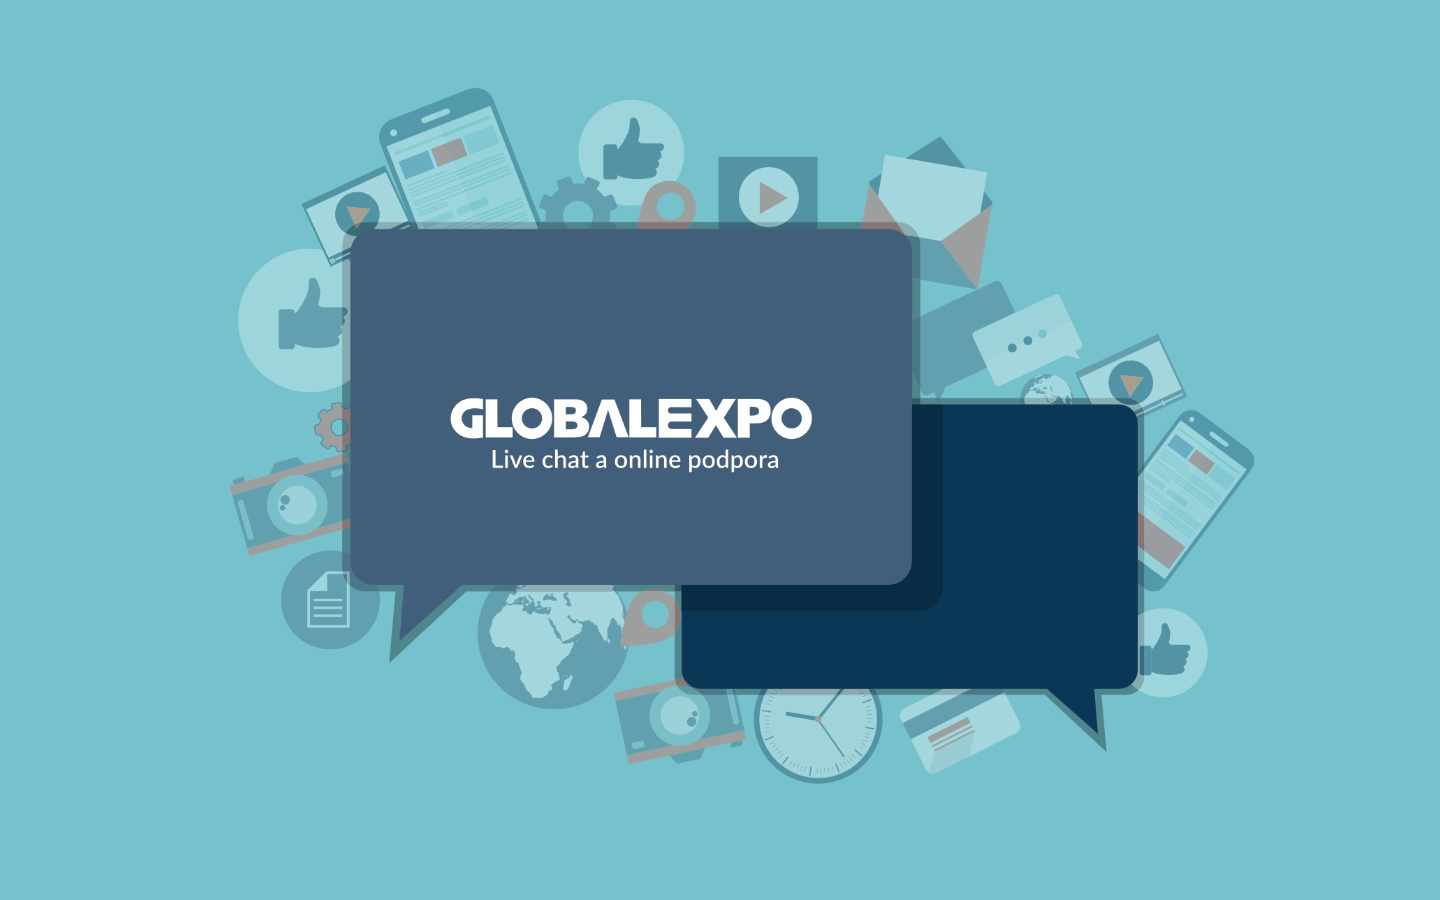 Instant online support for GLOBALEXPO exhibitors via live chat